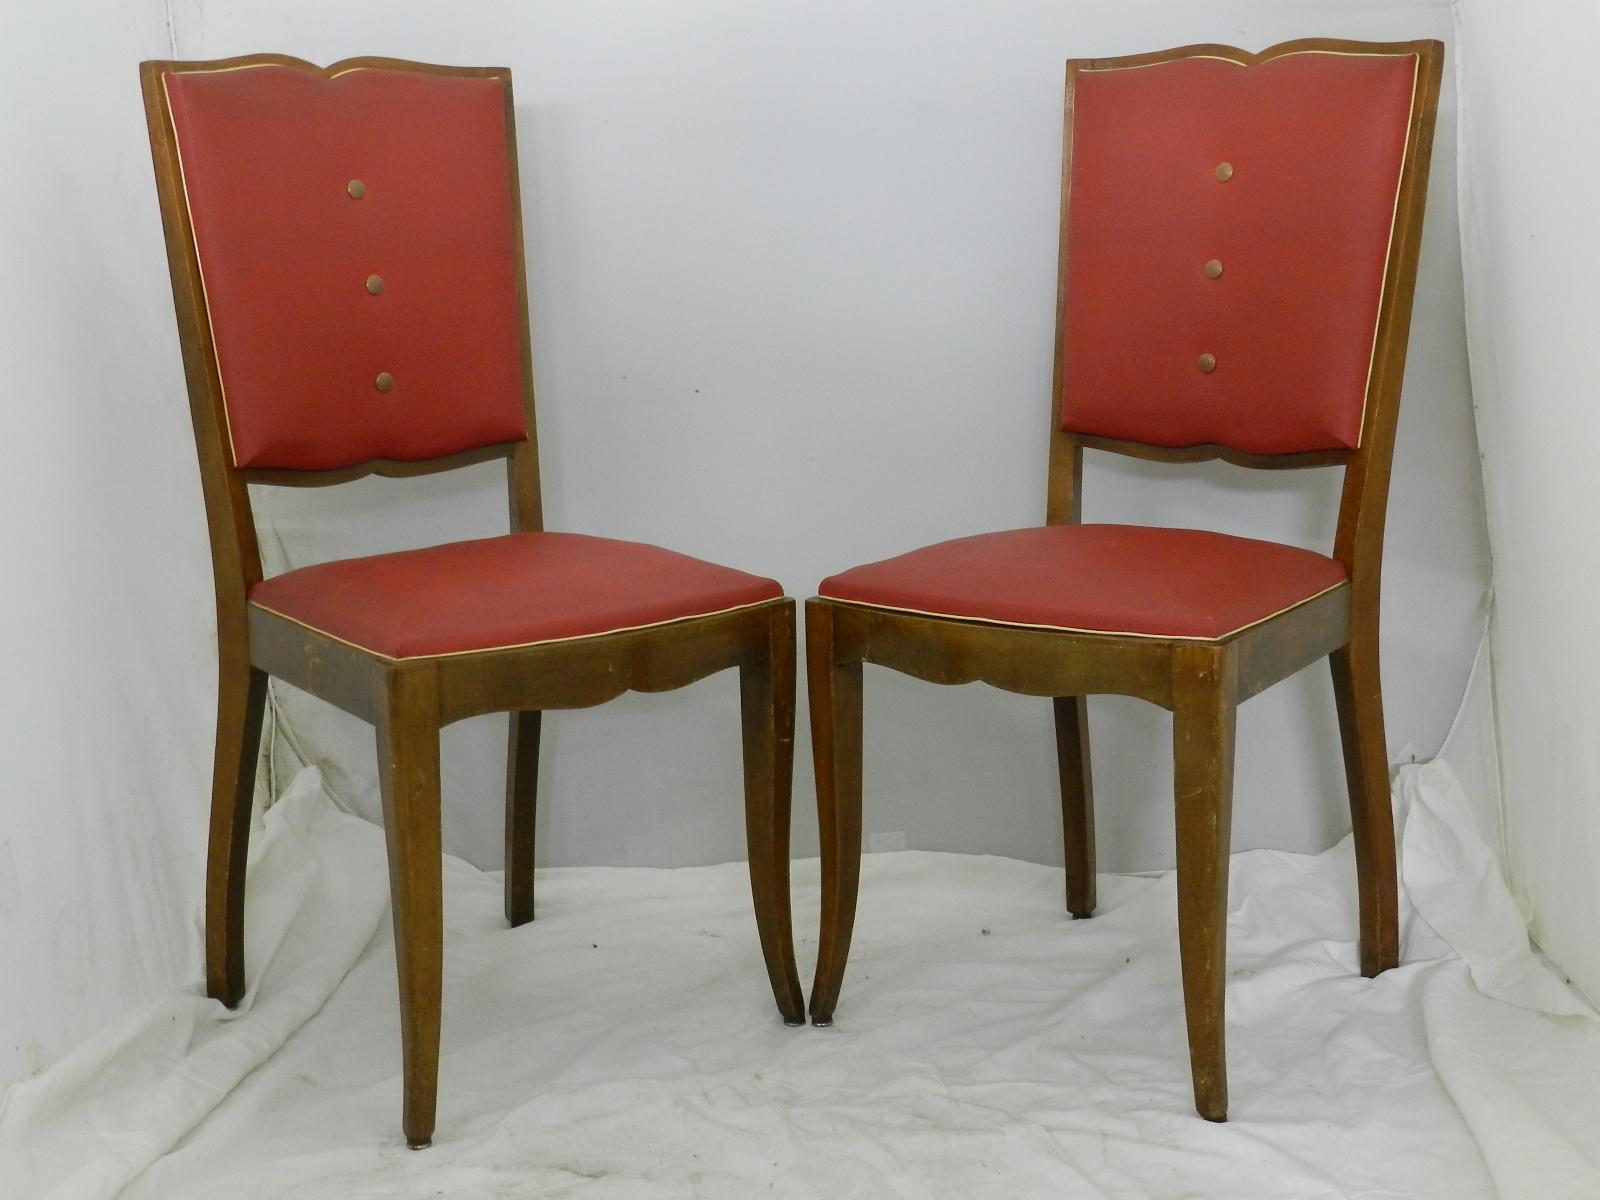 Pair of French Art Deco Moustache back chairs, circa 1930
Two side or dining chairs
Tufted button backs
Use as is or recover
Original vintage condition no holes
Frames are sound and solid.
 